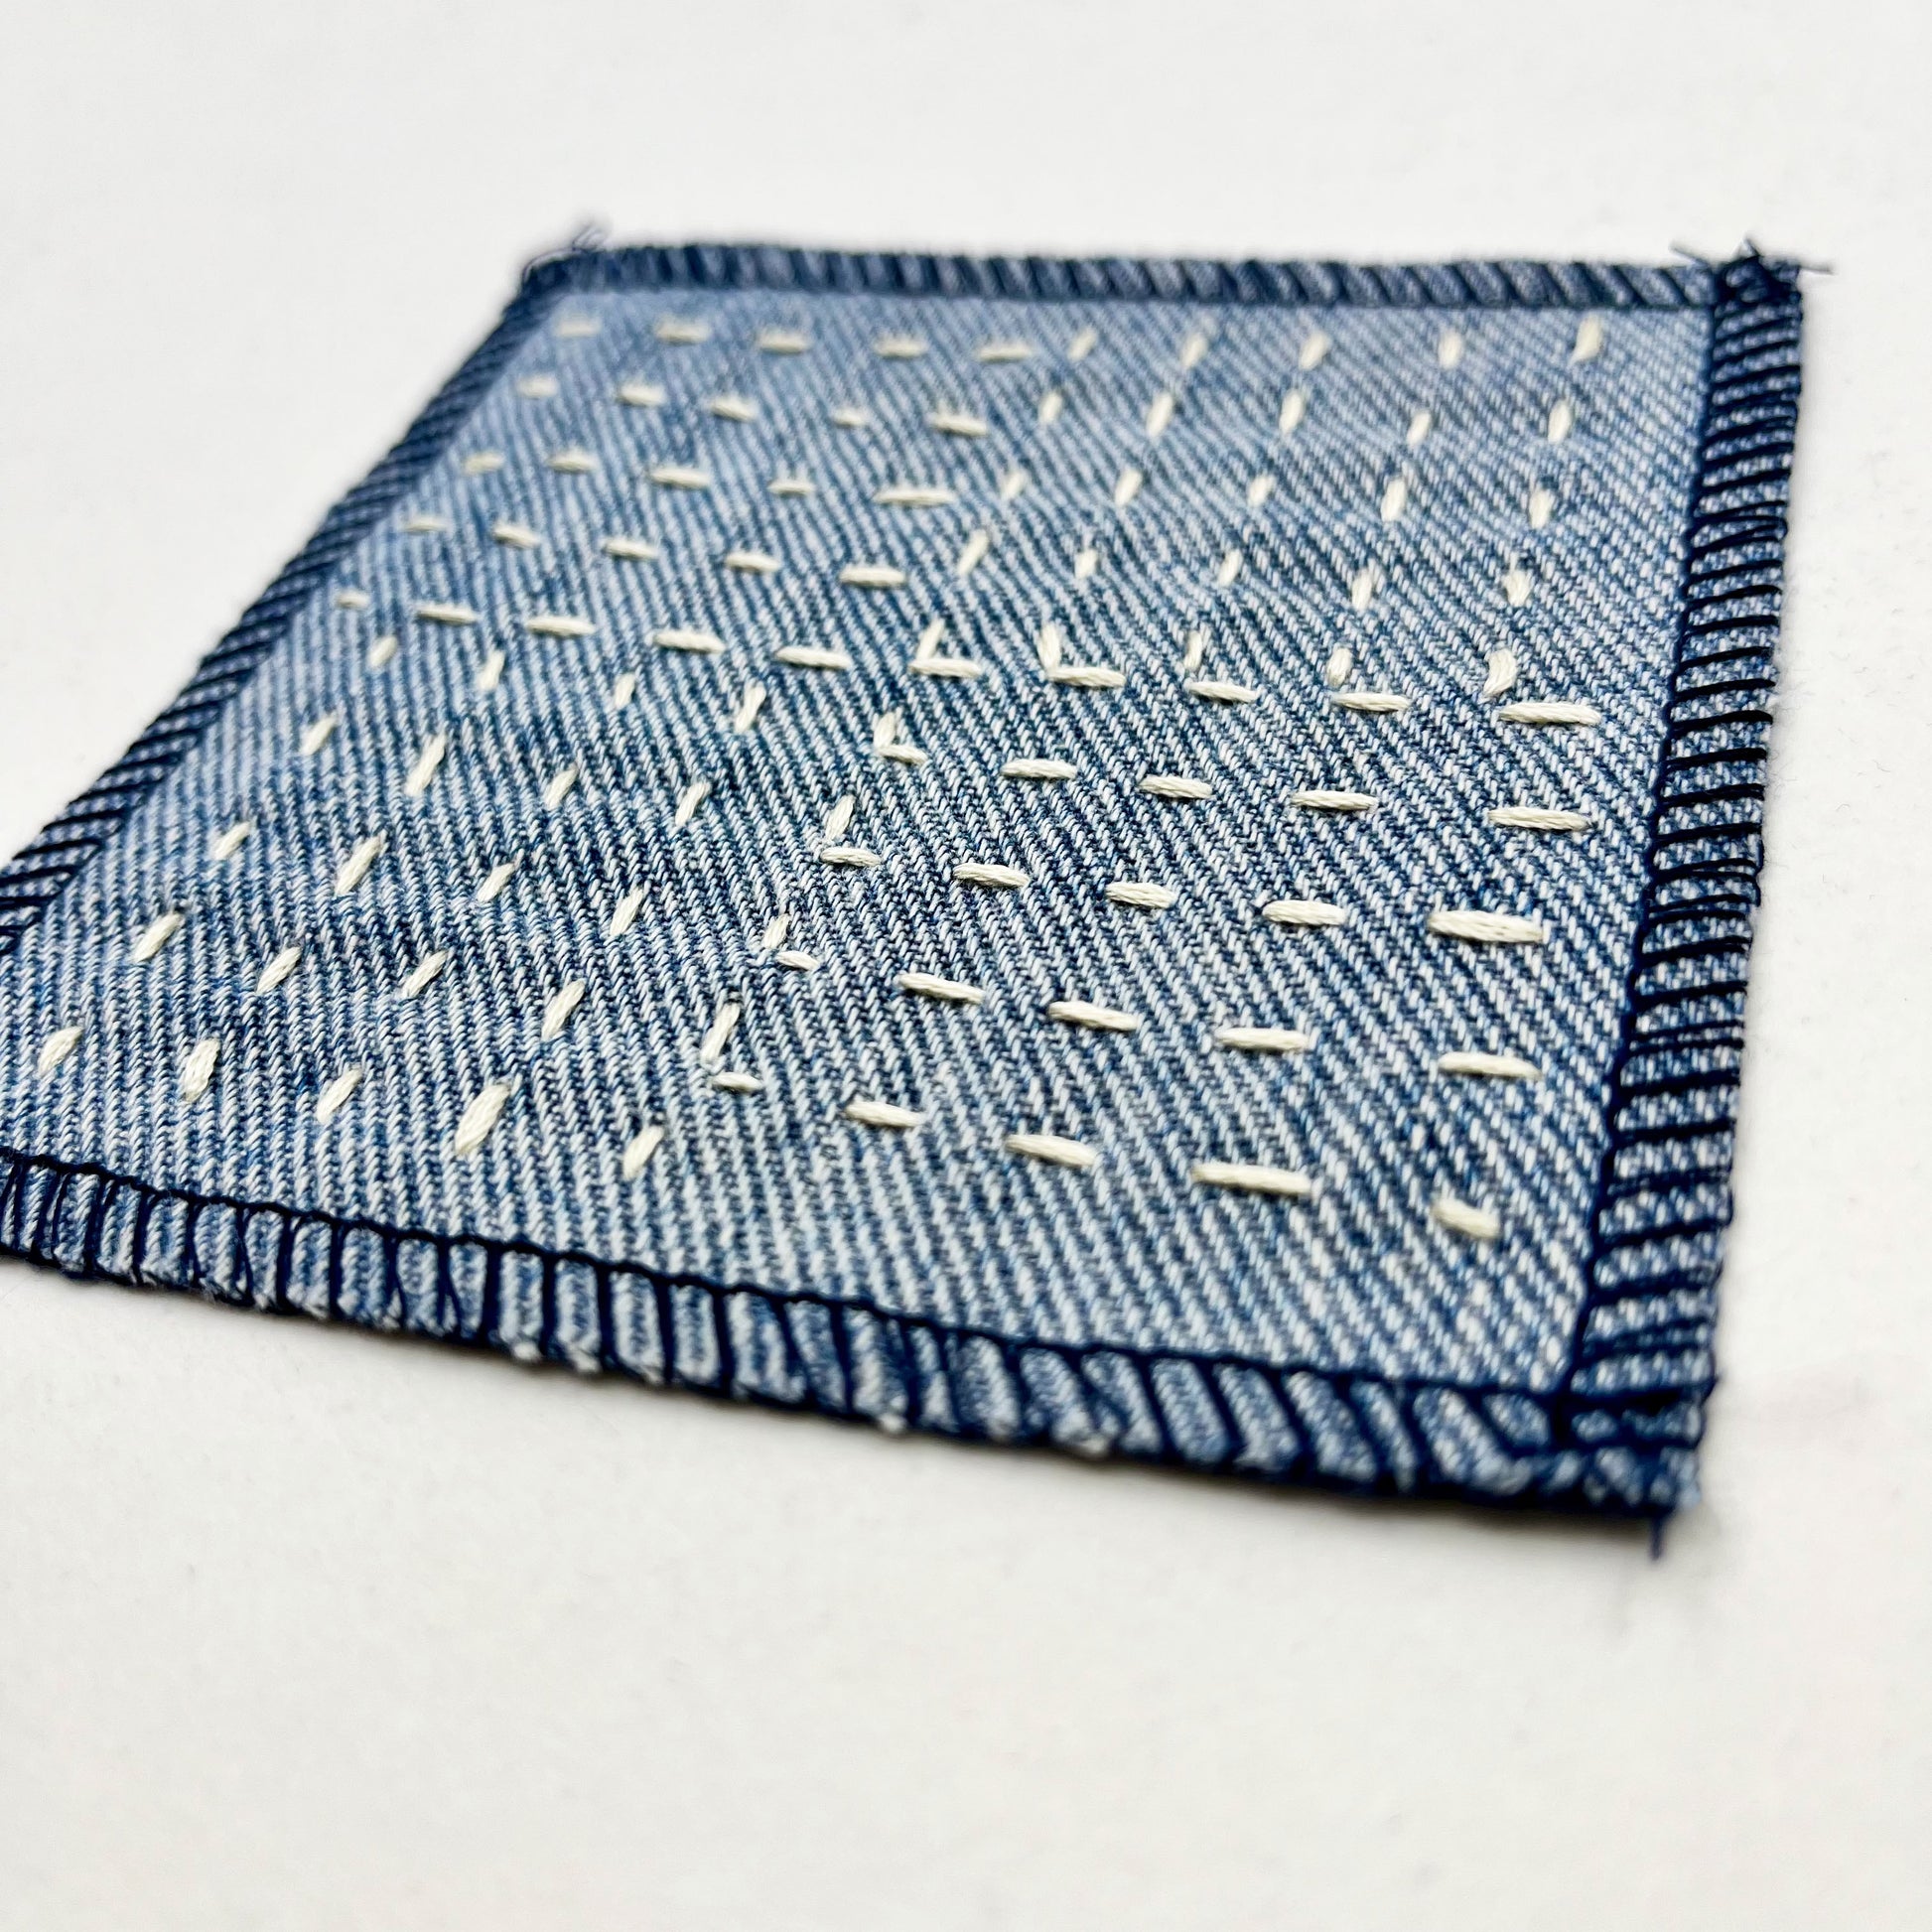 close up angled view of a square denim patch hand stitched in ivory with sashiko style running stitches in the pattern of a basket weave  on a white background